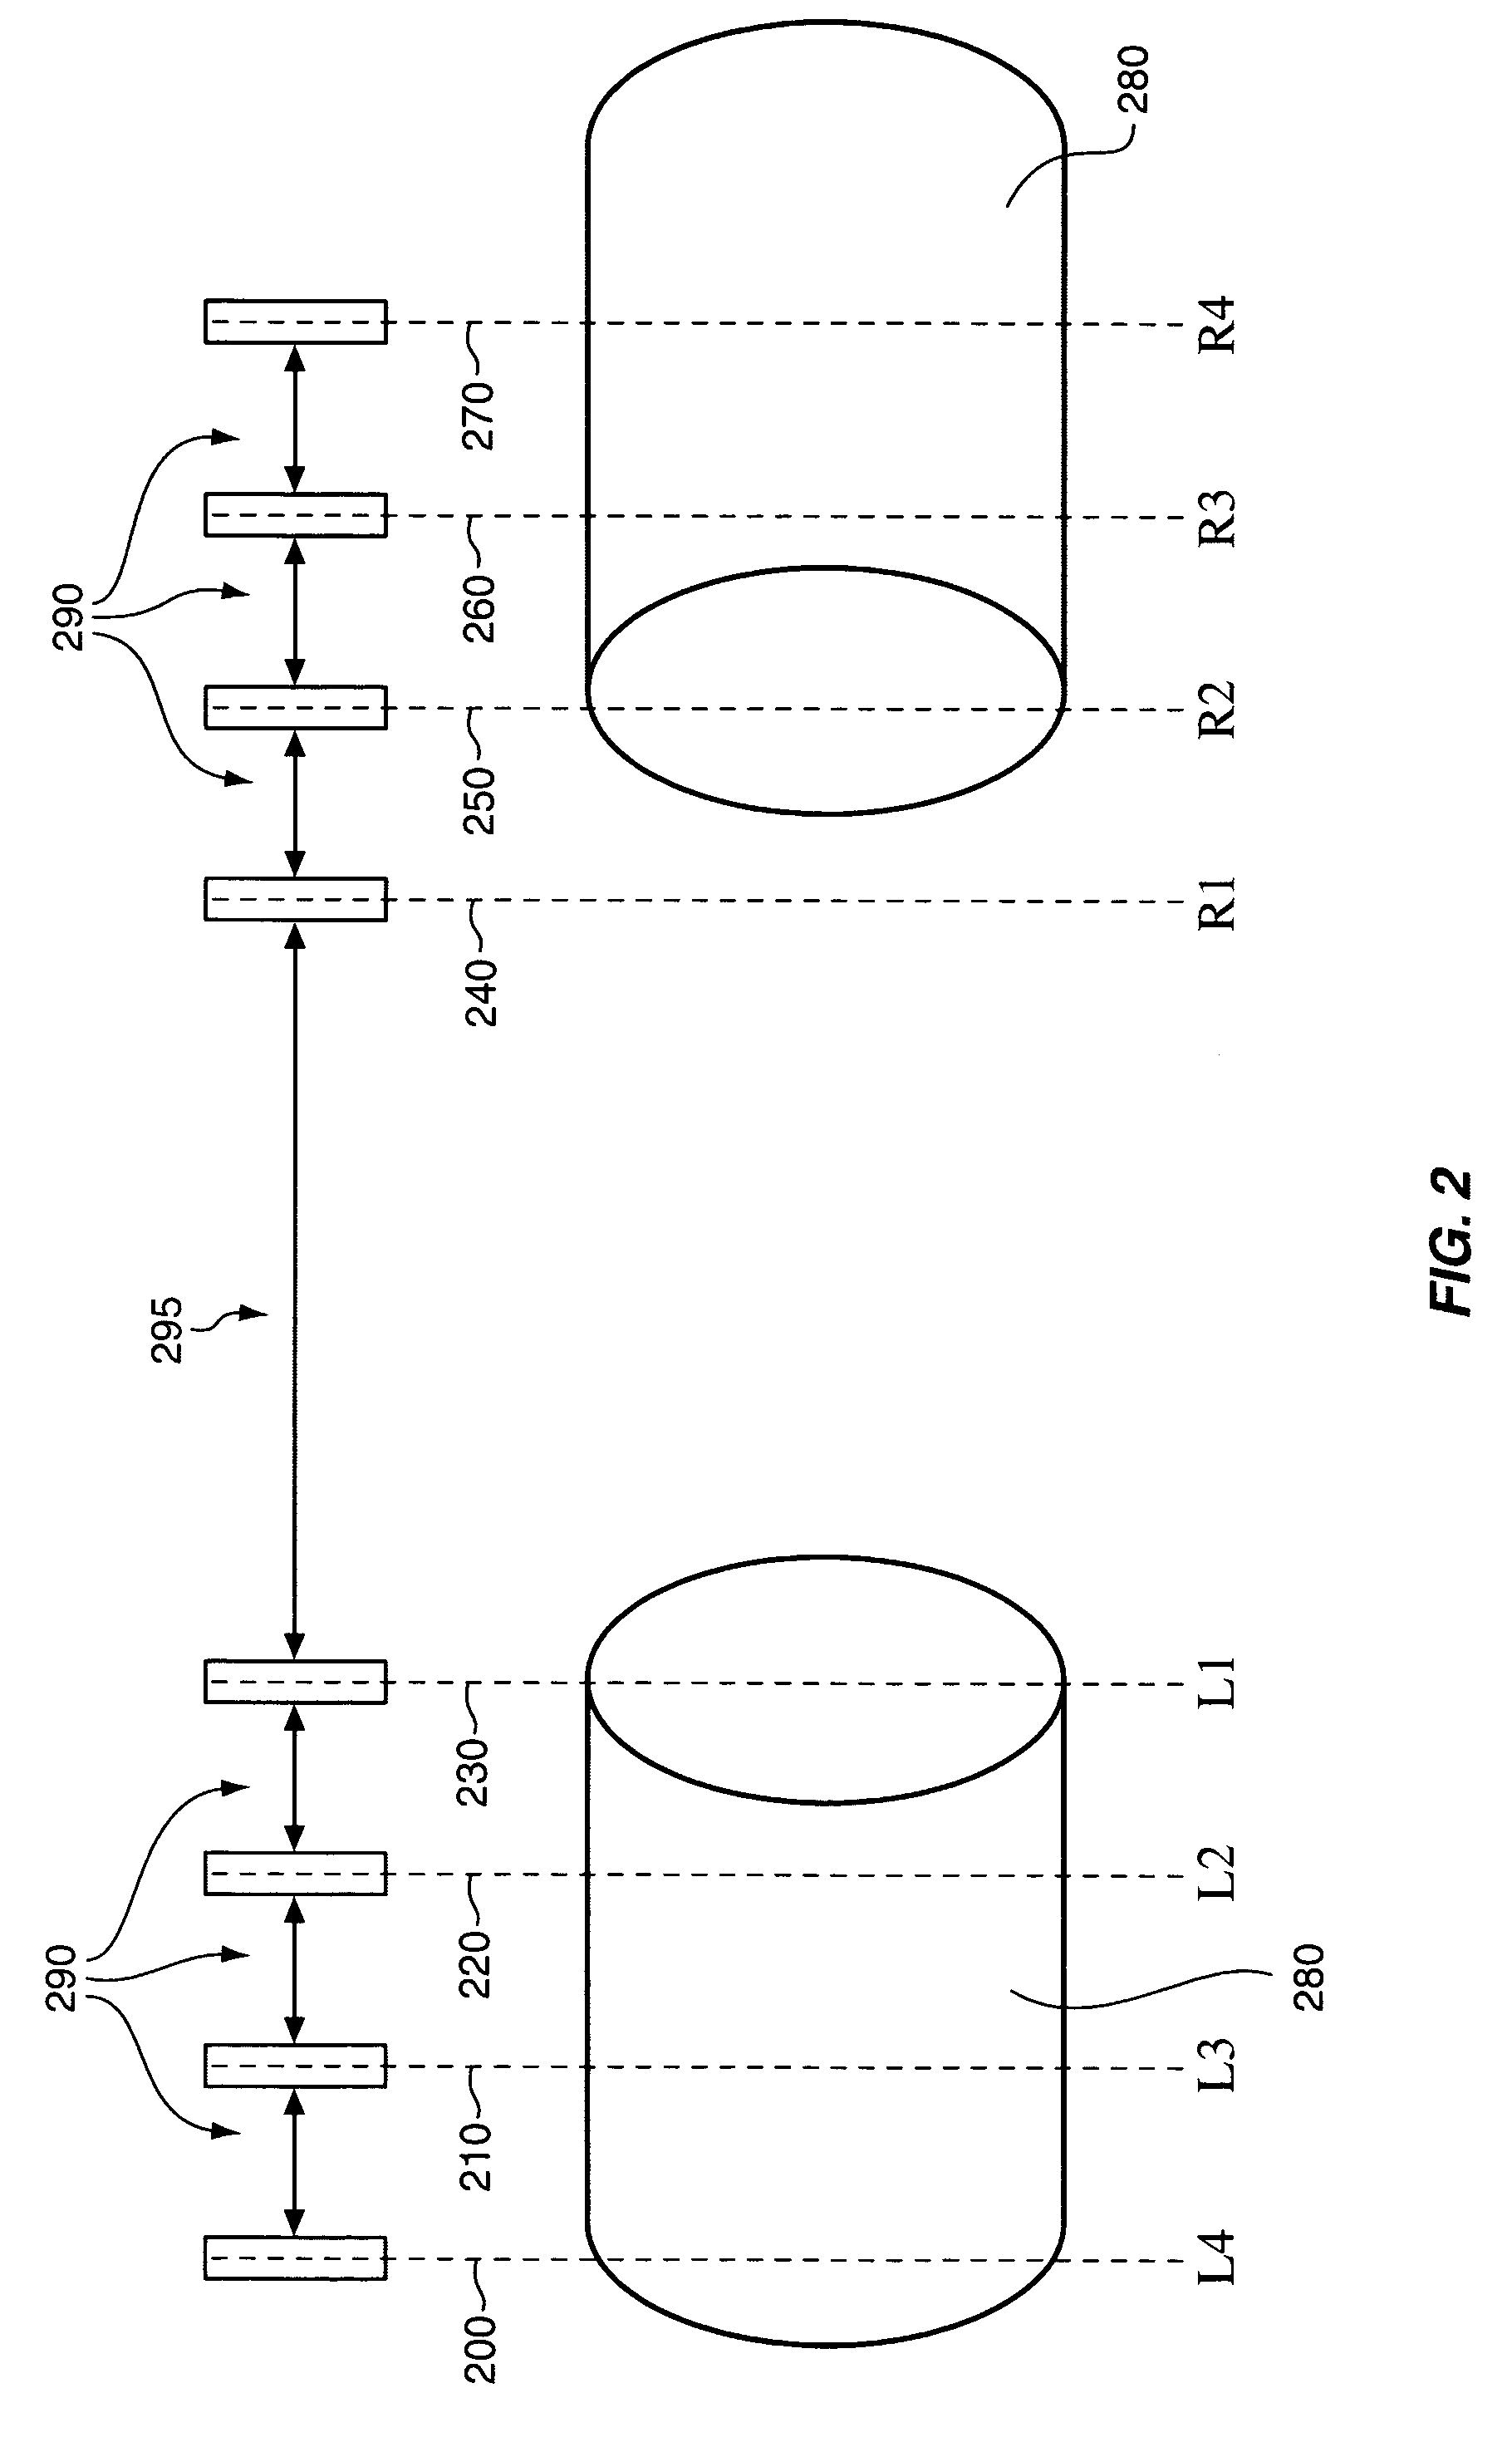 Thin-film electrochemical devices on fibrous or ribbon-like substrates and method for their manufacture and design